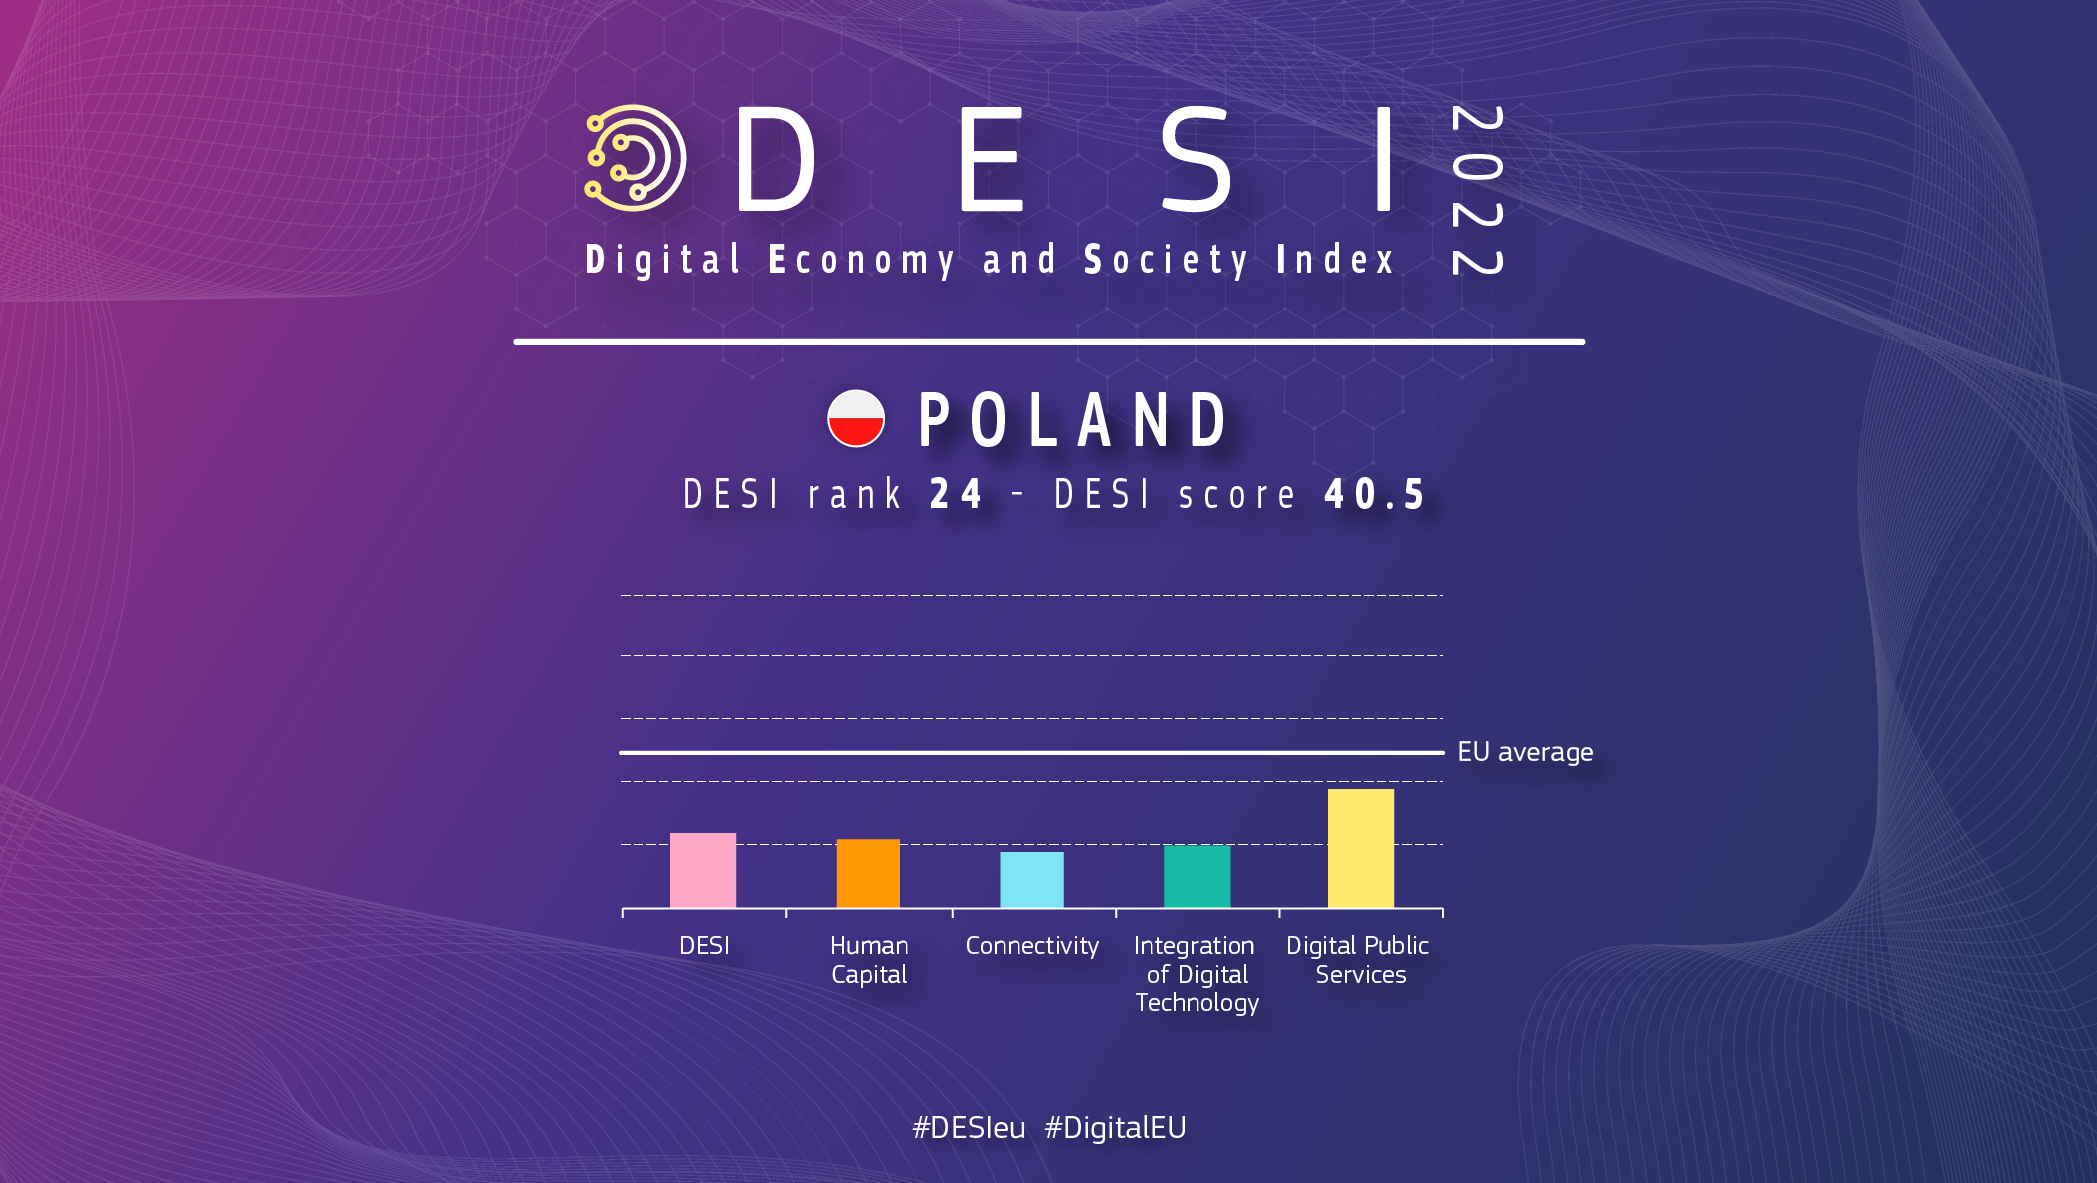 Graphic overview of Poland in DESI showing a ranking of 24 with a score of 40.5